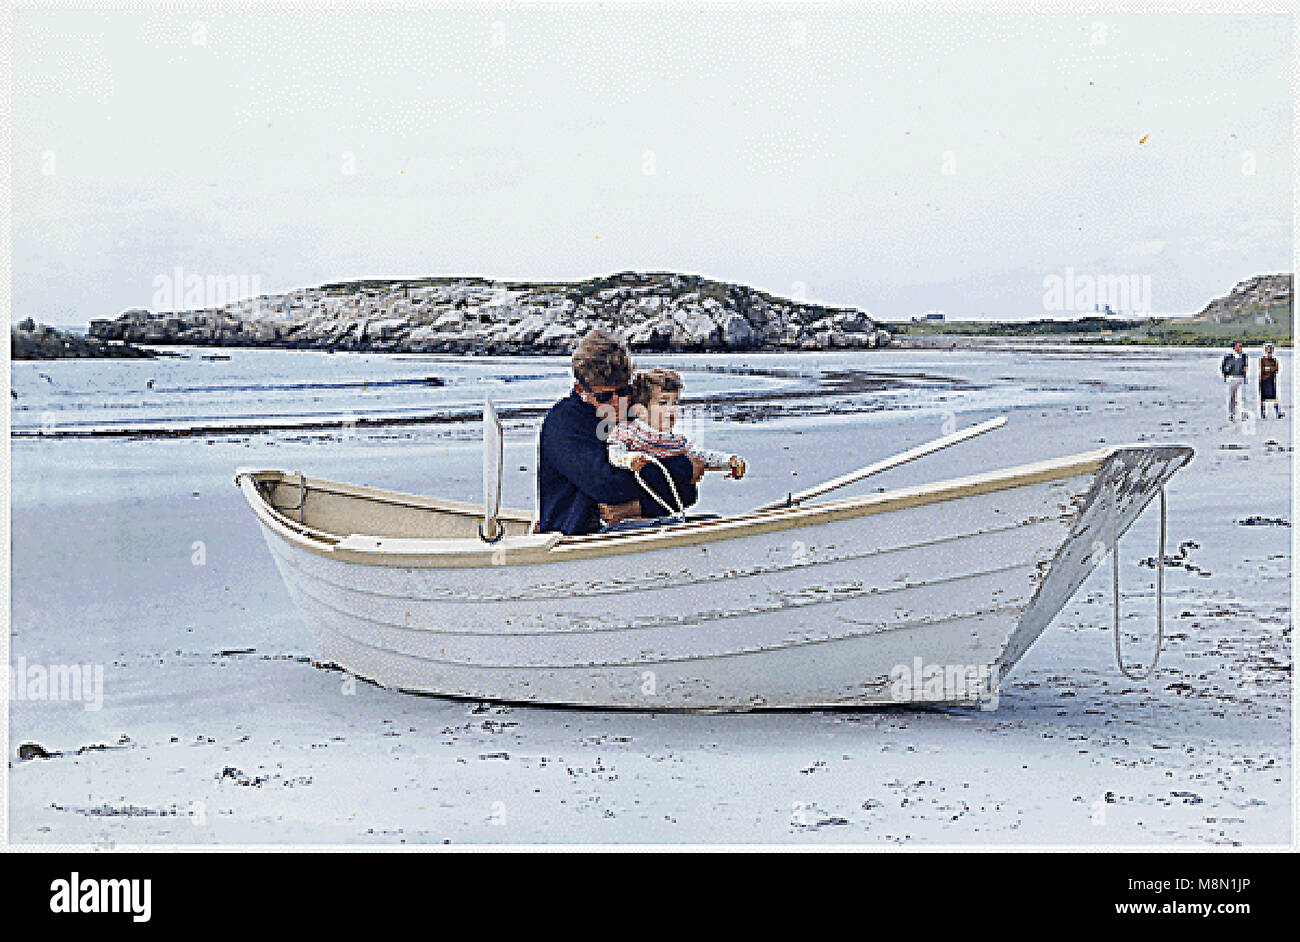 United States President John F. Kennedy plays with his son, John F. Kennedy, Jr., in beached rowboat during a weekend on Bailey's Beach in Newport, Rhode Island on September 15, 1963. Credit: White House via CNP /MediaPunch Stock Photo